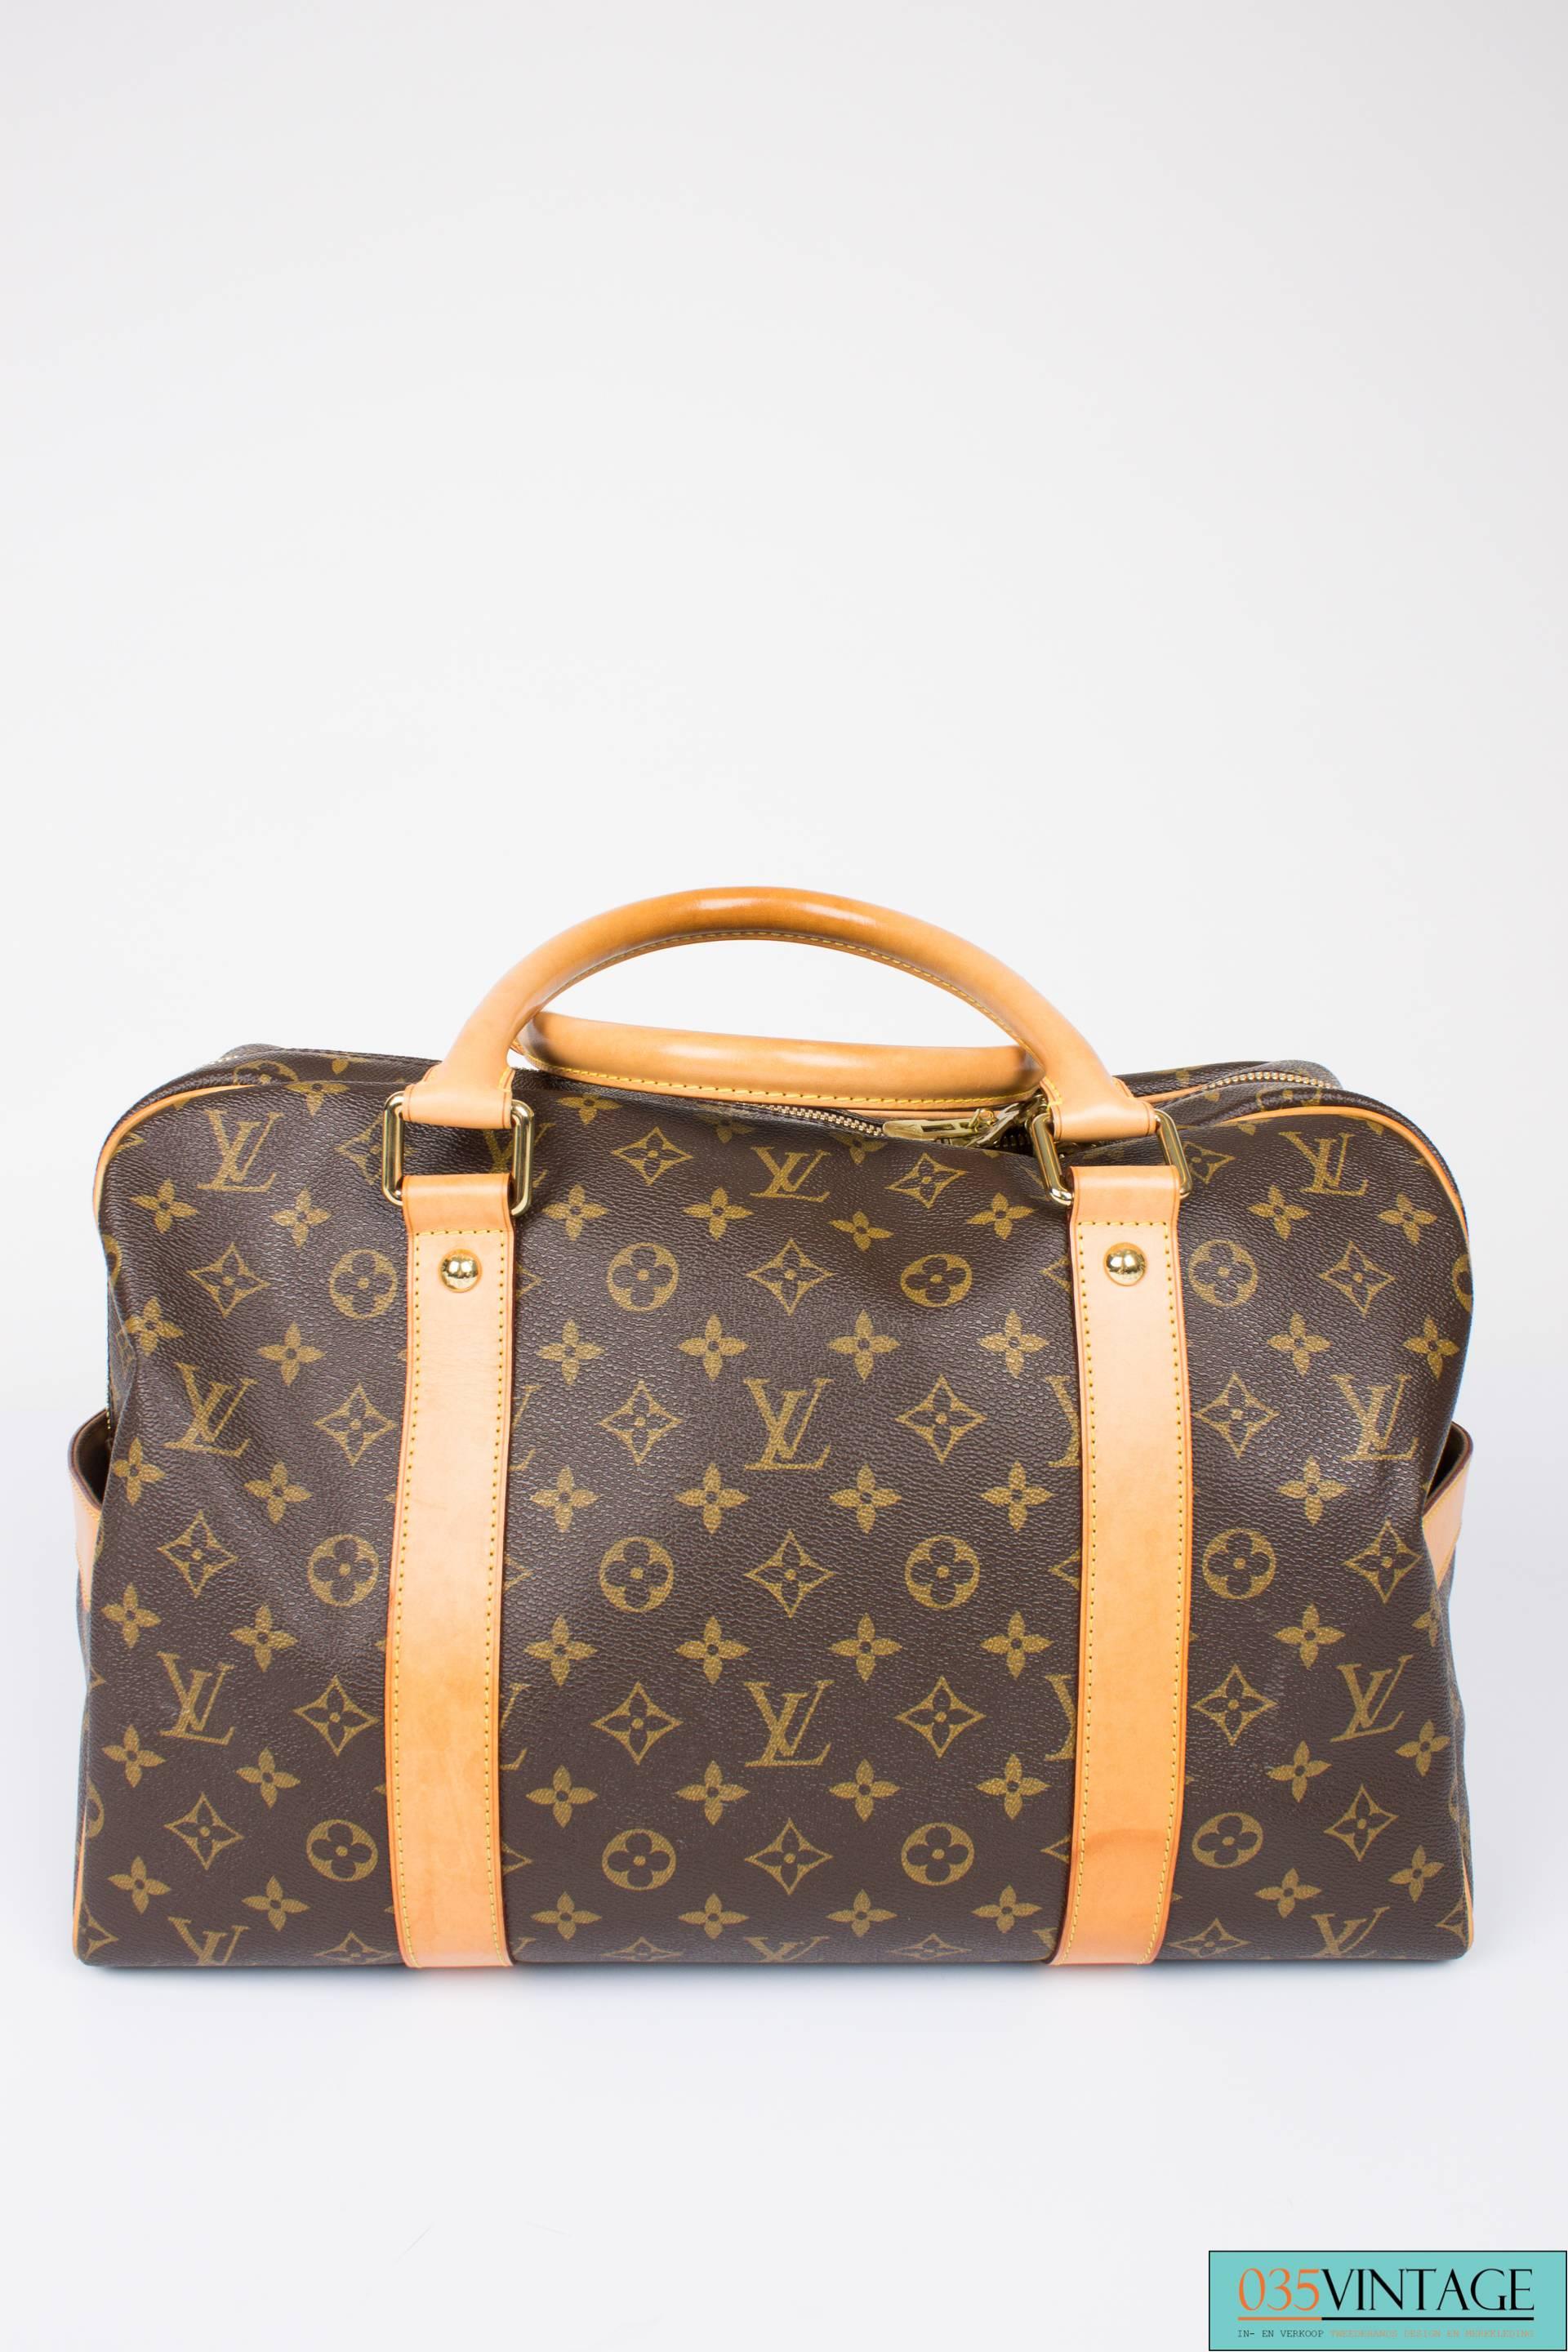 Weekend bag by Louis Vuitton, are we going to Rome or Barcelona?!

This LV Carry All bag has the perfect size; not too small, not too big. Also ideal as a sports bag, for example. The measurements are: W 42 cm, H 27 cm, D 24 cm. It isn't new, but